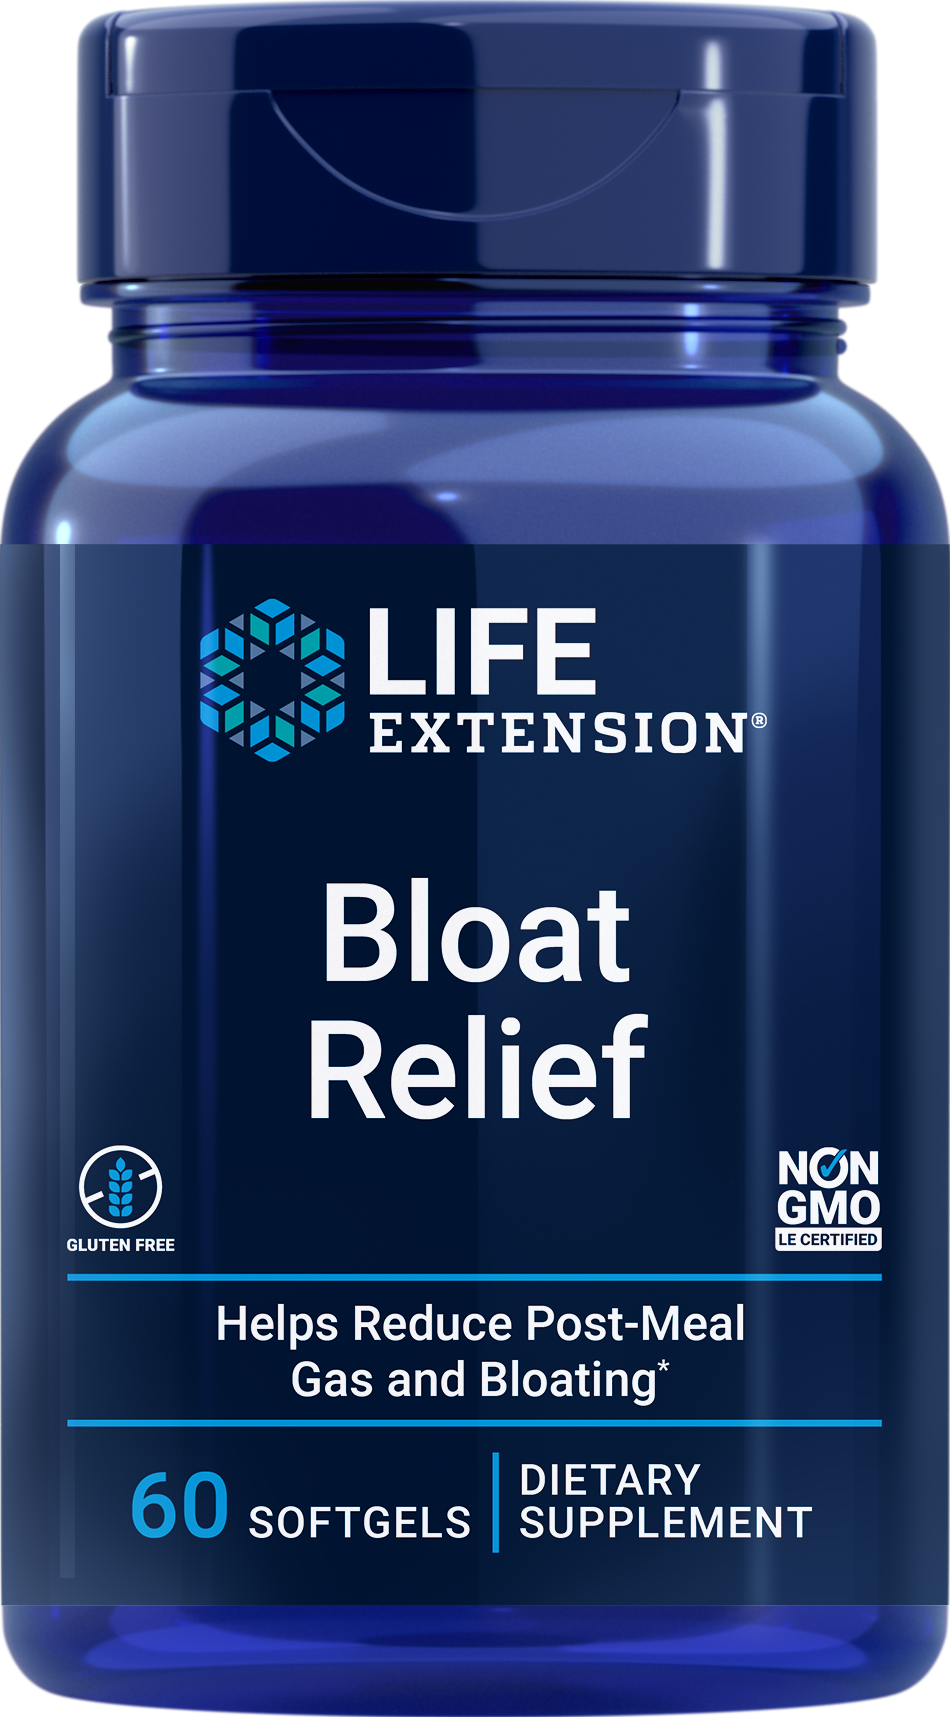 Life Extension's new Bloat Relief formula helps reduce post meal gas and bloating. Learn more at https://www.lifeextension.com/BloatRelief.